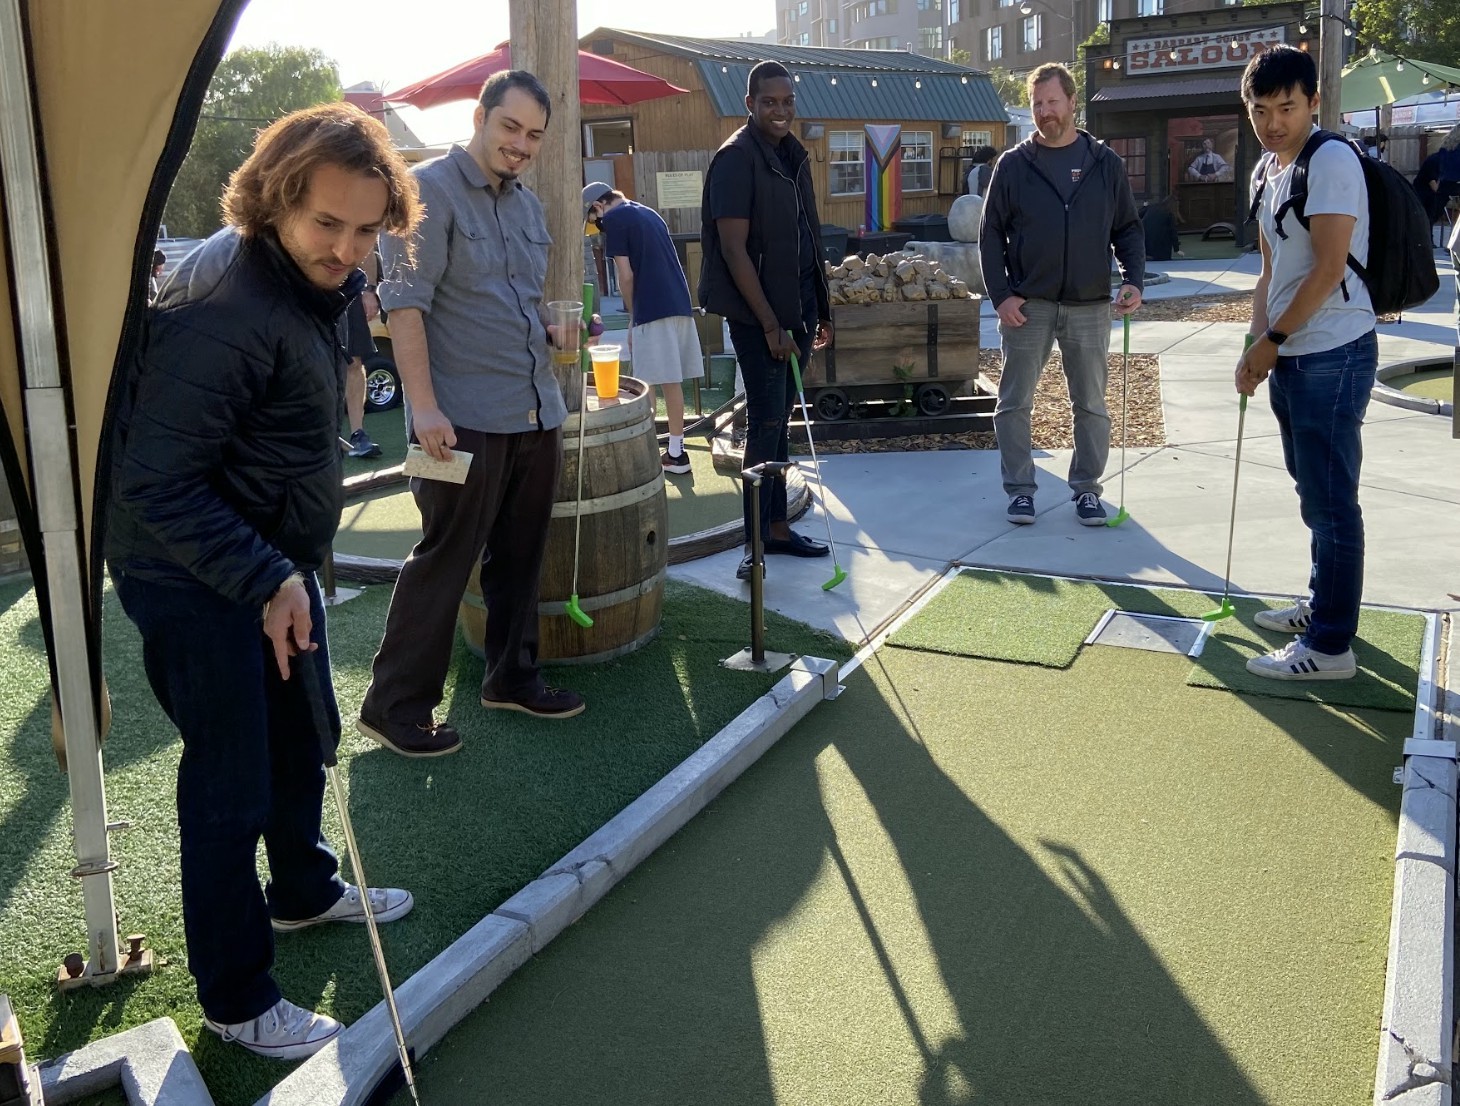 Members of our engineering and operations team play happy hour mini-golf with our CEO, Roman Pedan